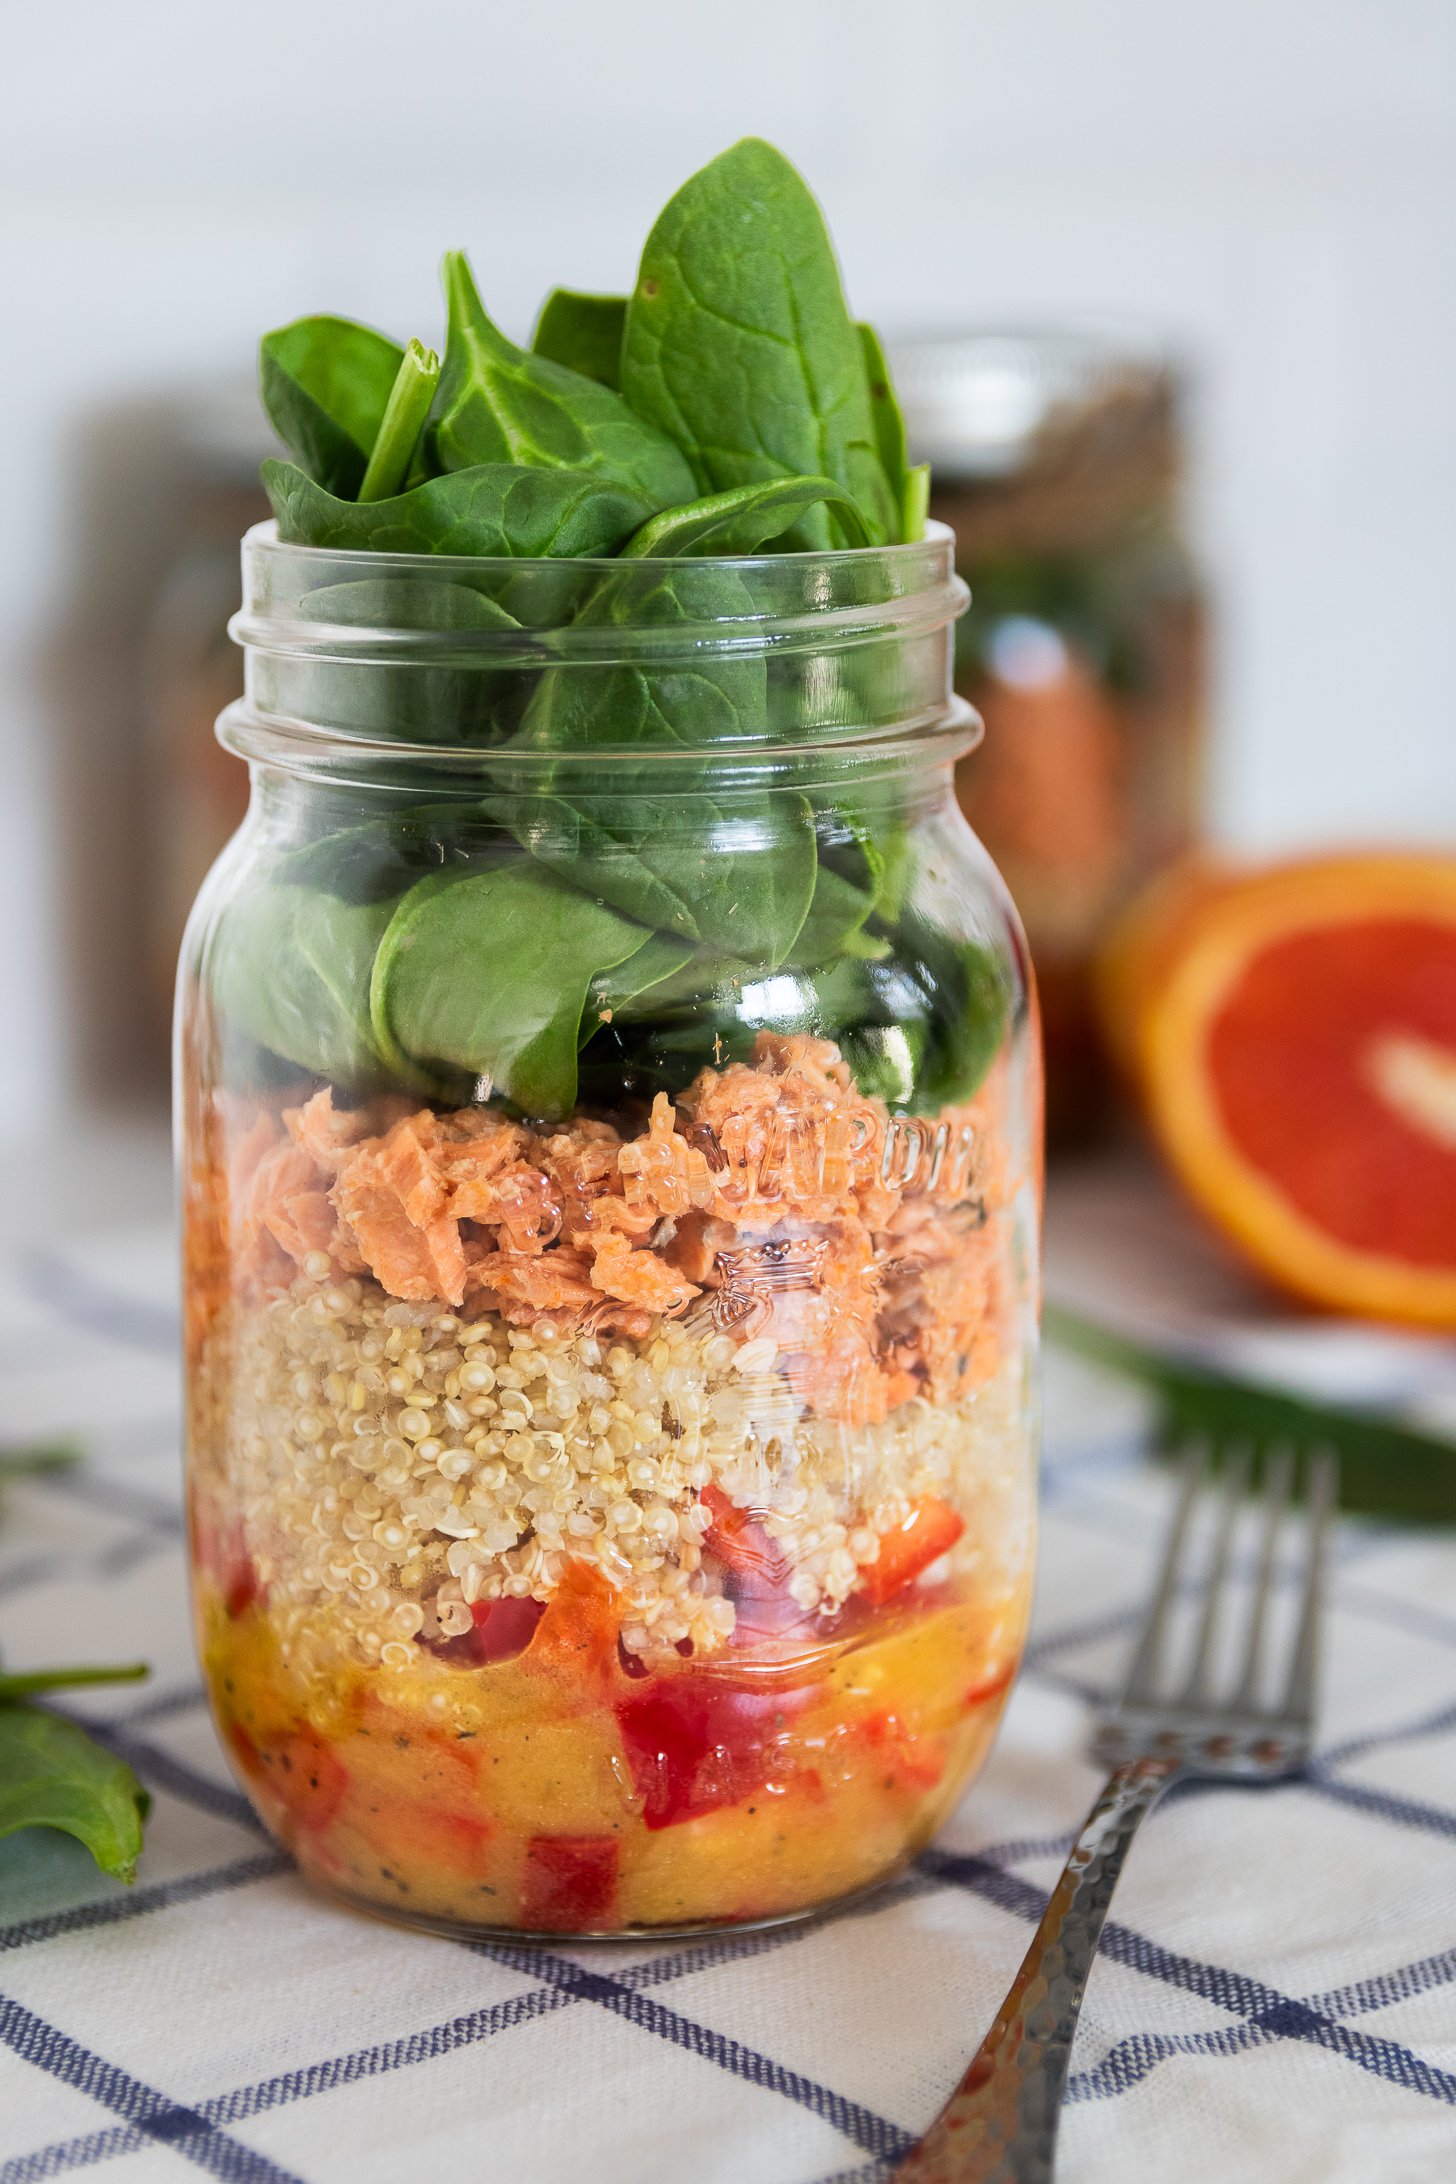 A close up image of a colourful layered mason jar salad with peppers, quinoa, canned salmon, and spinach leaves on top, creating a vibrant salad.